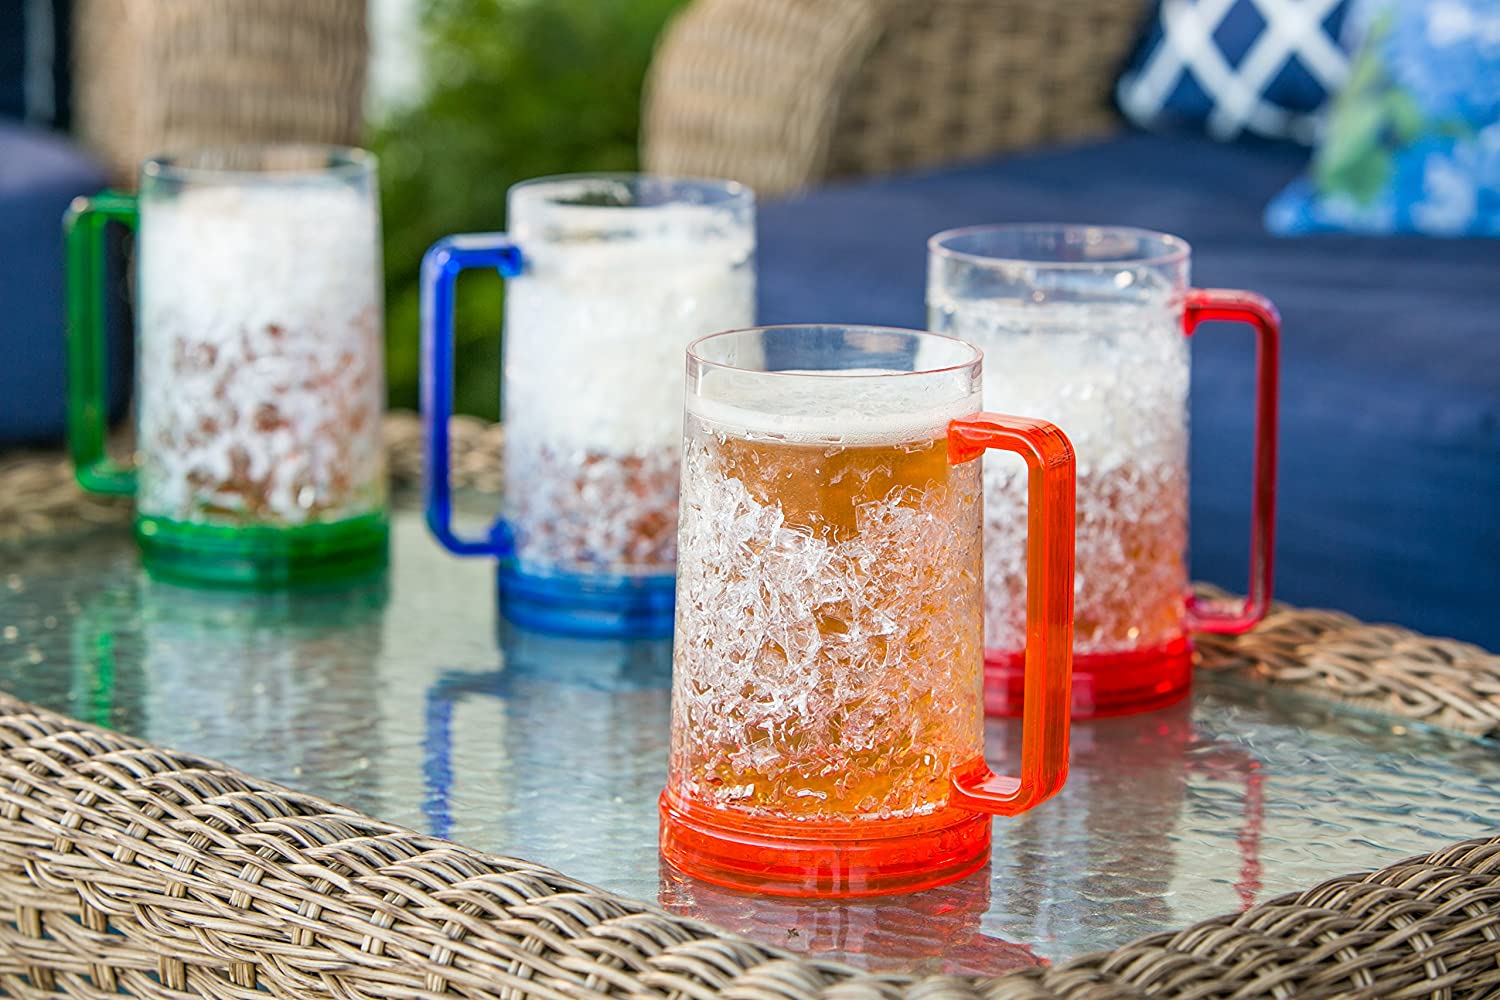 Double Wall Gel Frosty Beer Mugs, Freezer Ice Mugs, Drinking Glasses 16oz, Clear Set of 4, Assorted Colors (Red, Yellow, Blue, O